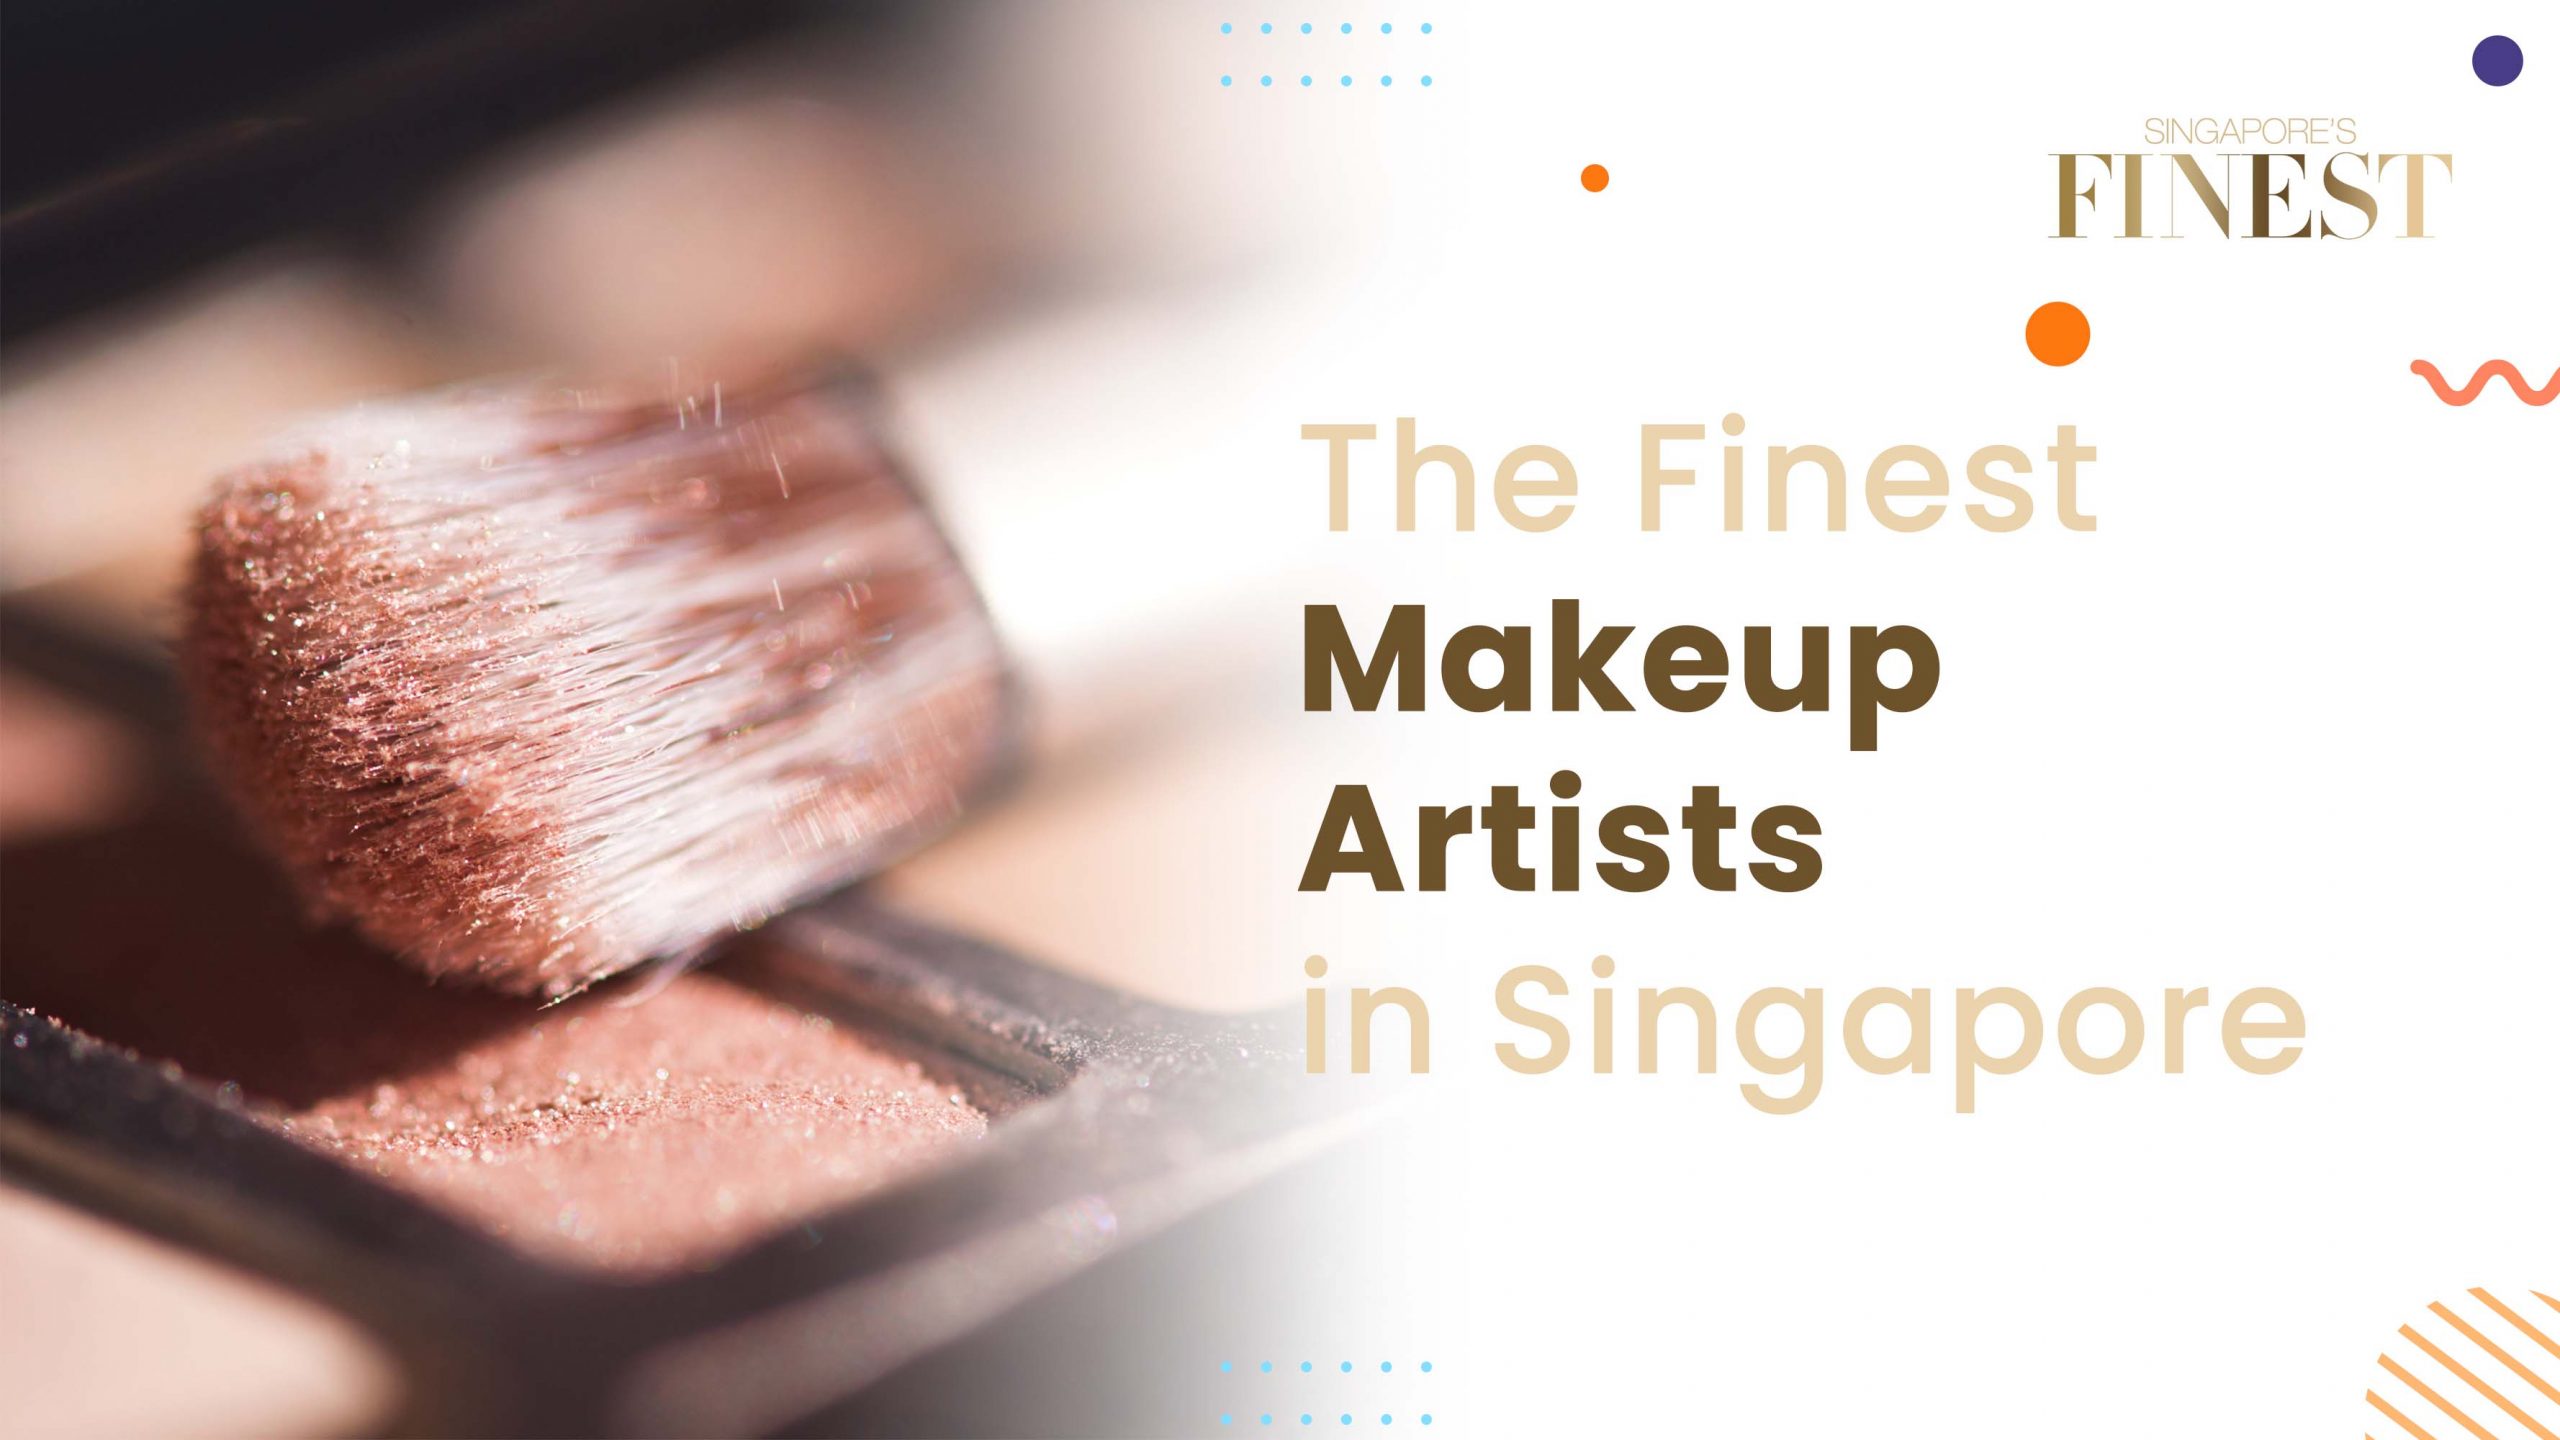 The Finest Makeup Artists in Singapore